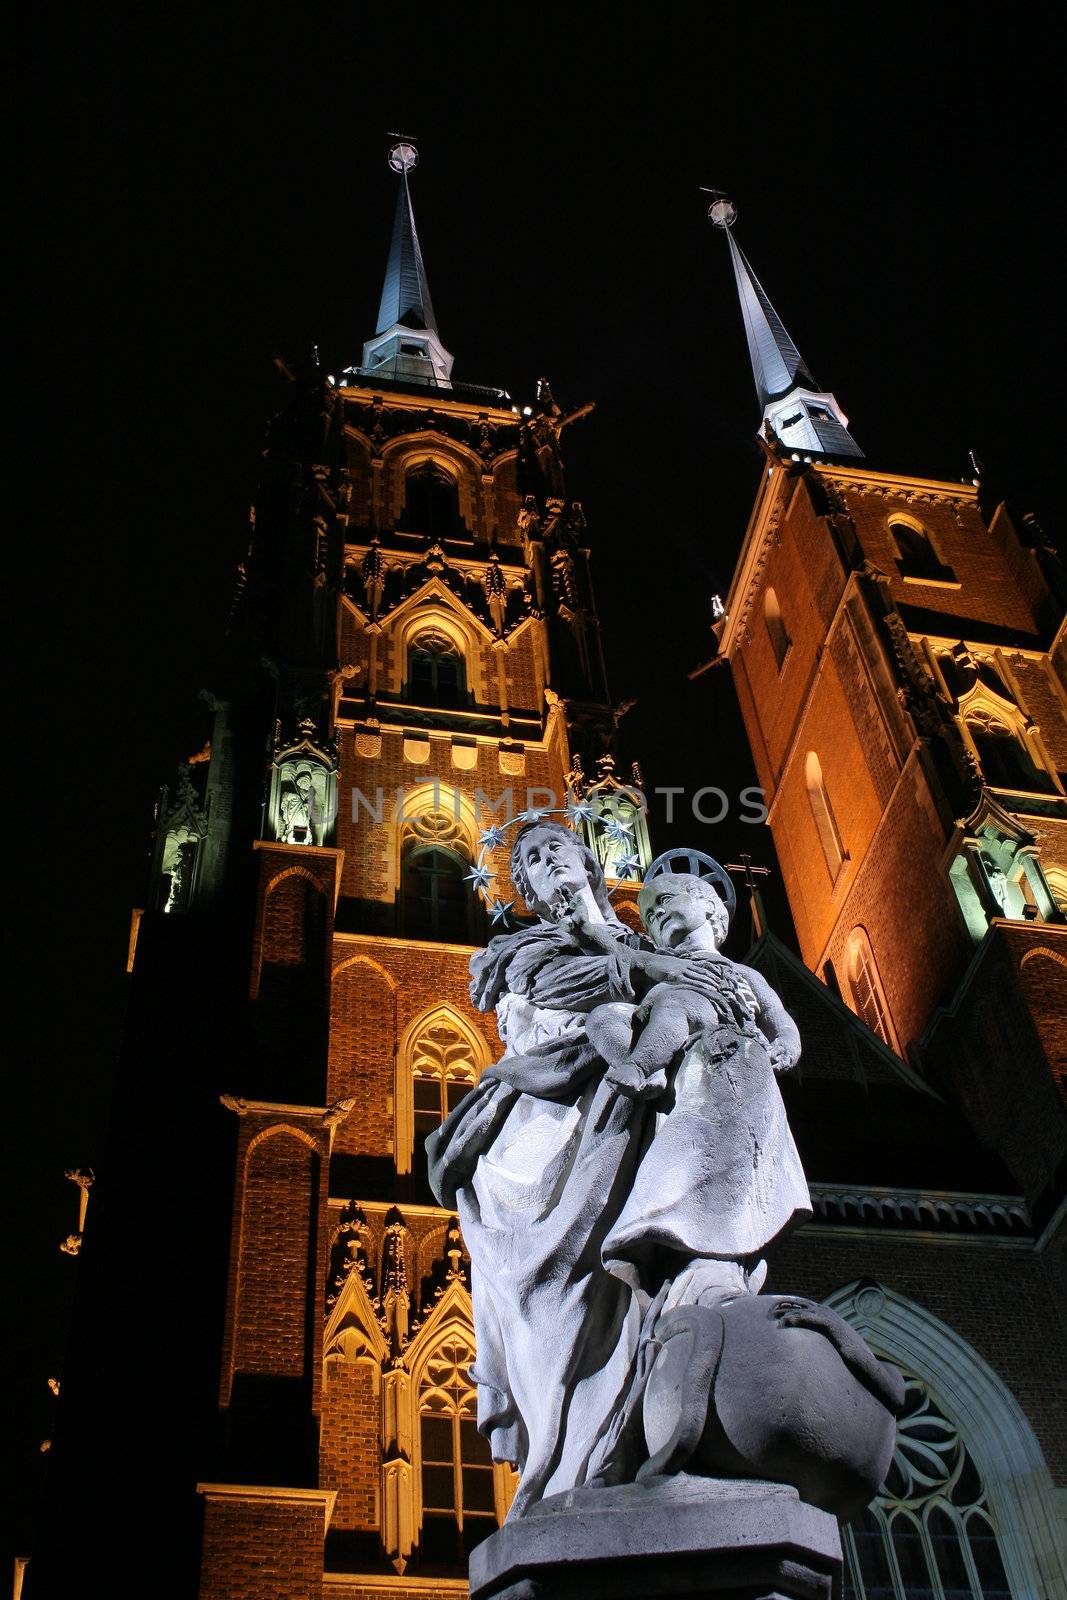 Saint marie with Jesus child, St. John`s Cathedral in background